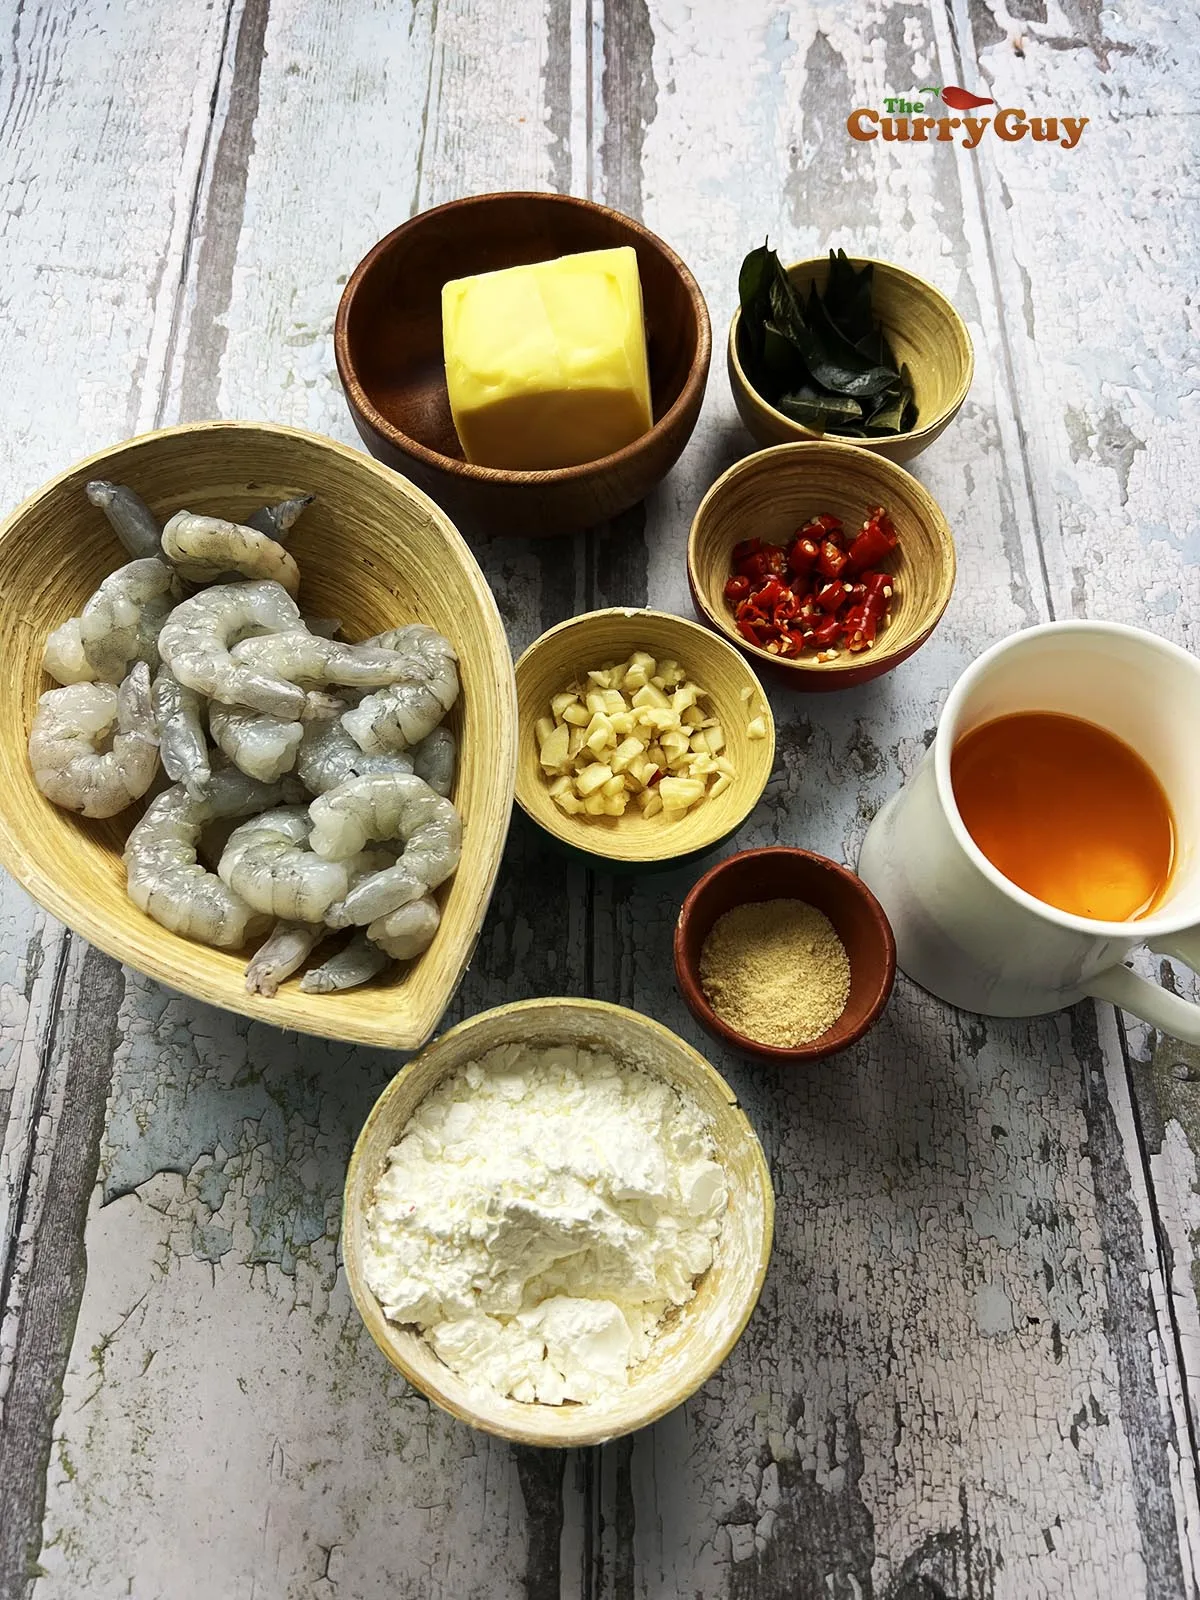 Ingredients for butter prawns with egg floss